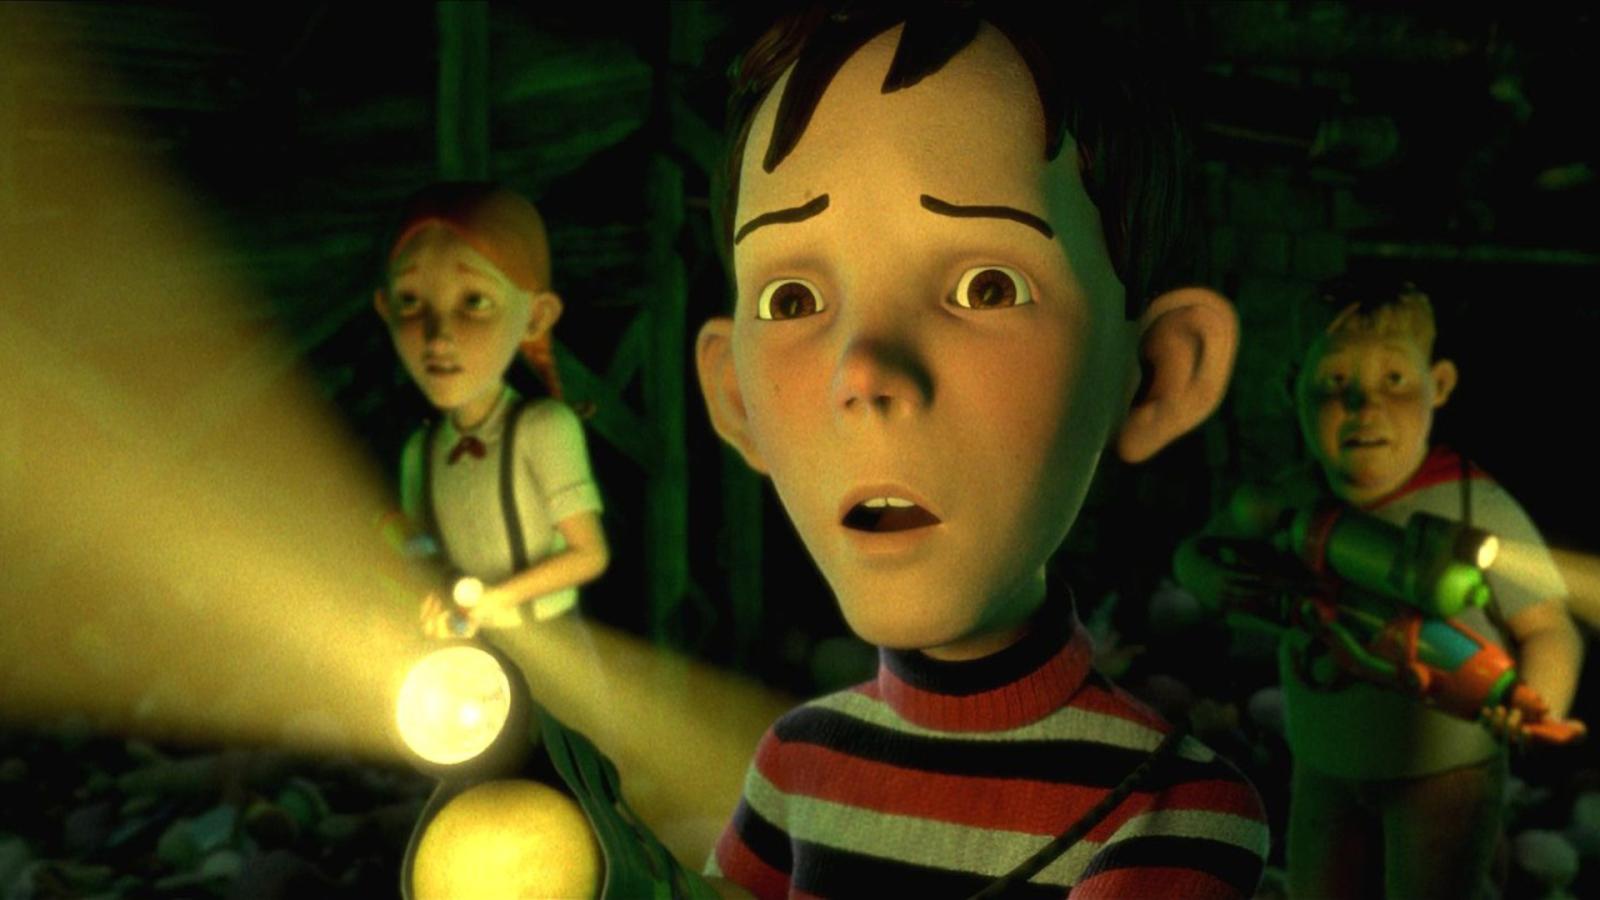 7 Scary Halloween Movies Age-Appropriate for Kids - image 7